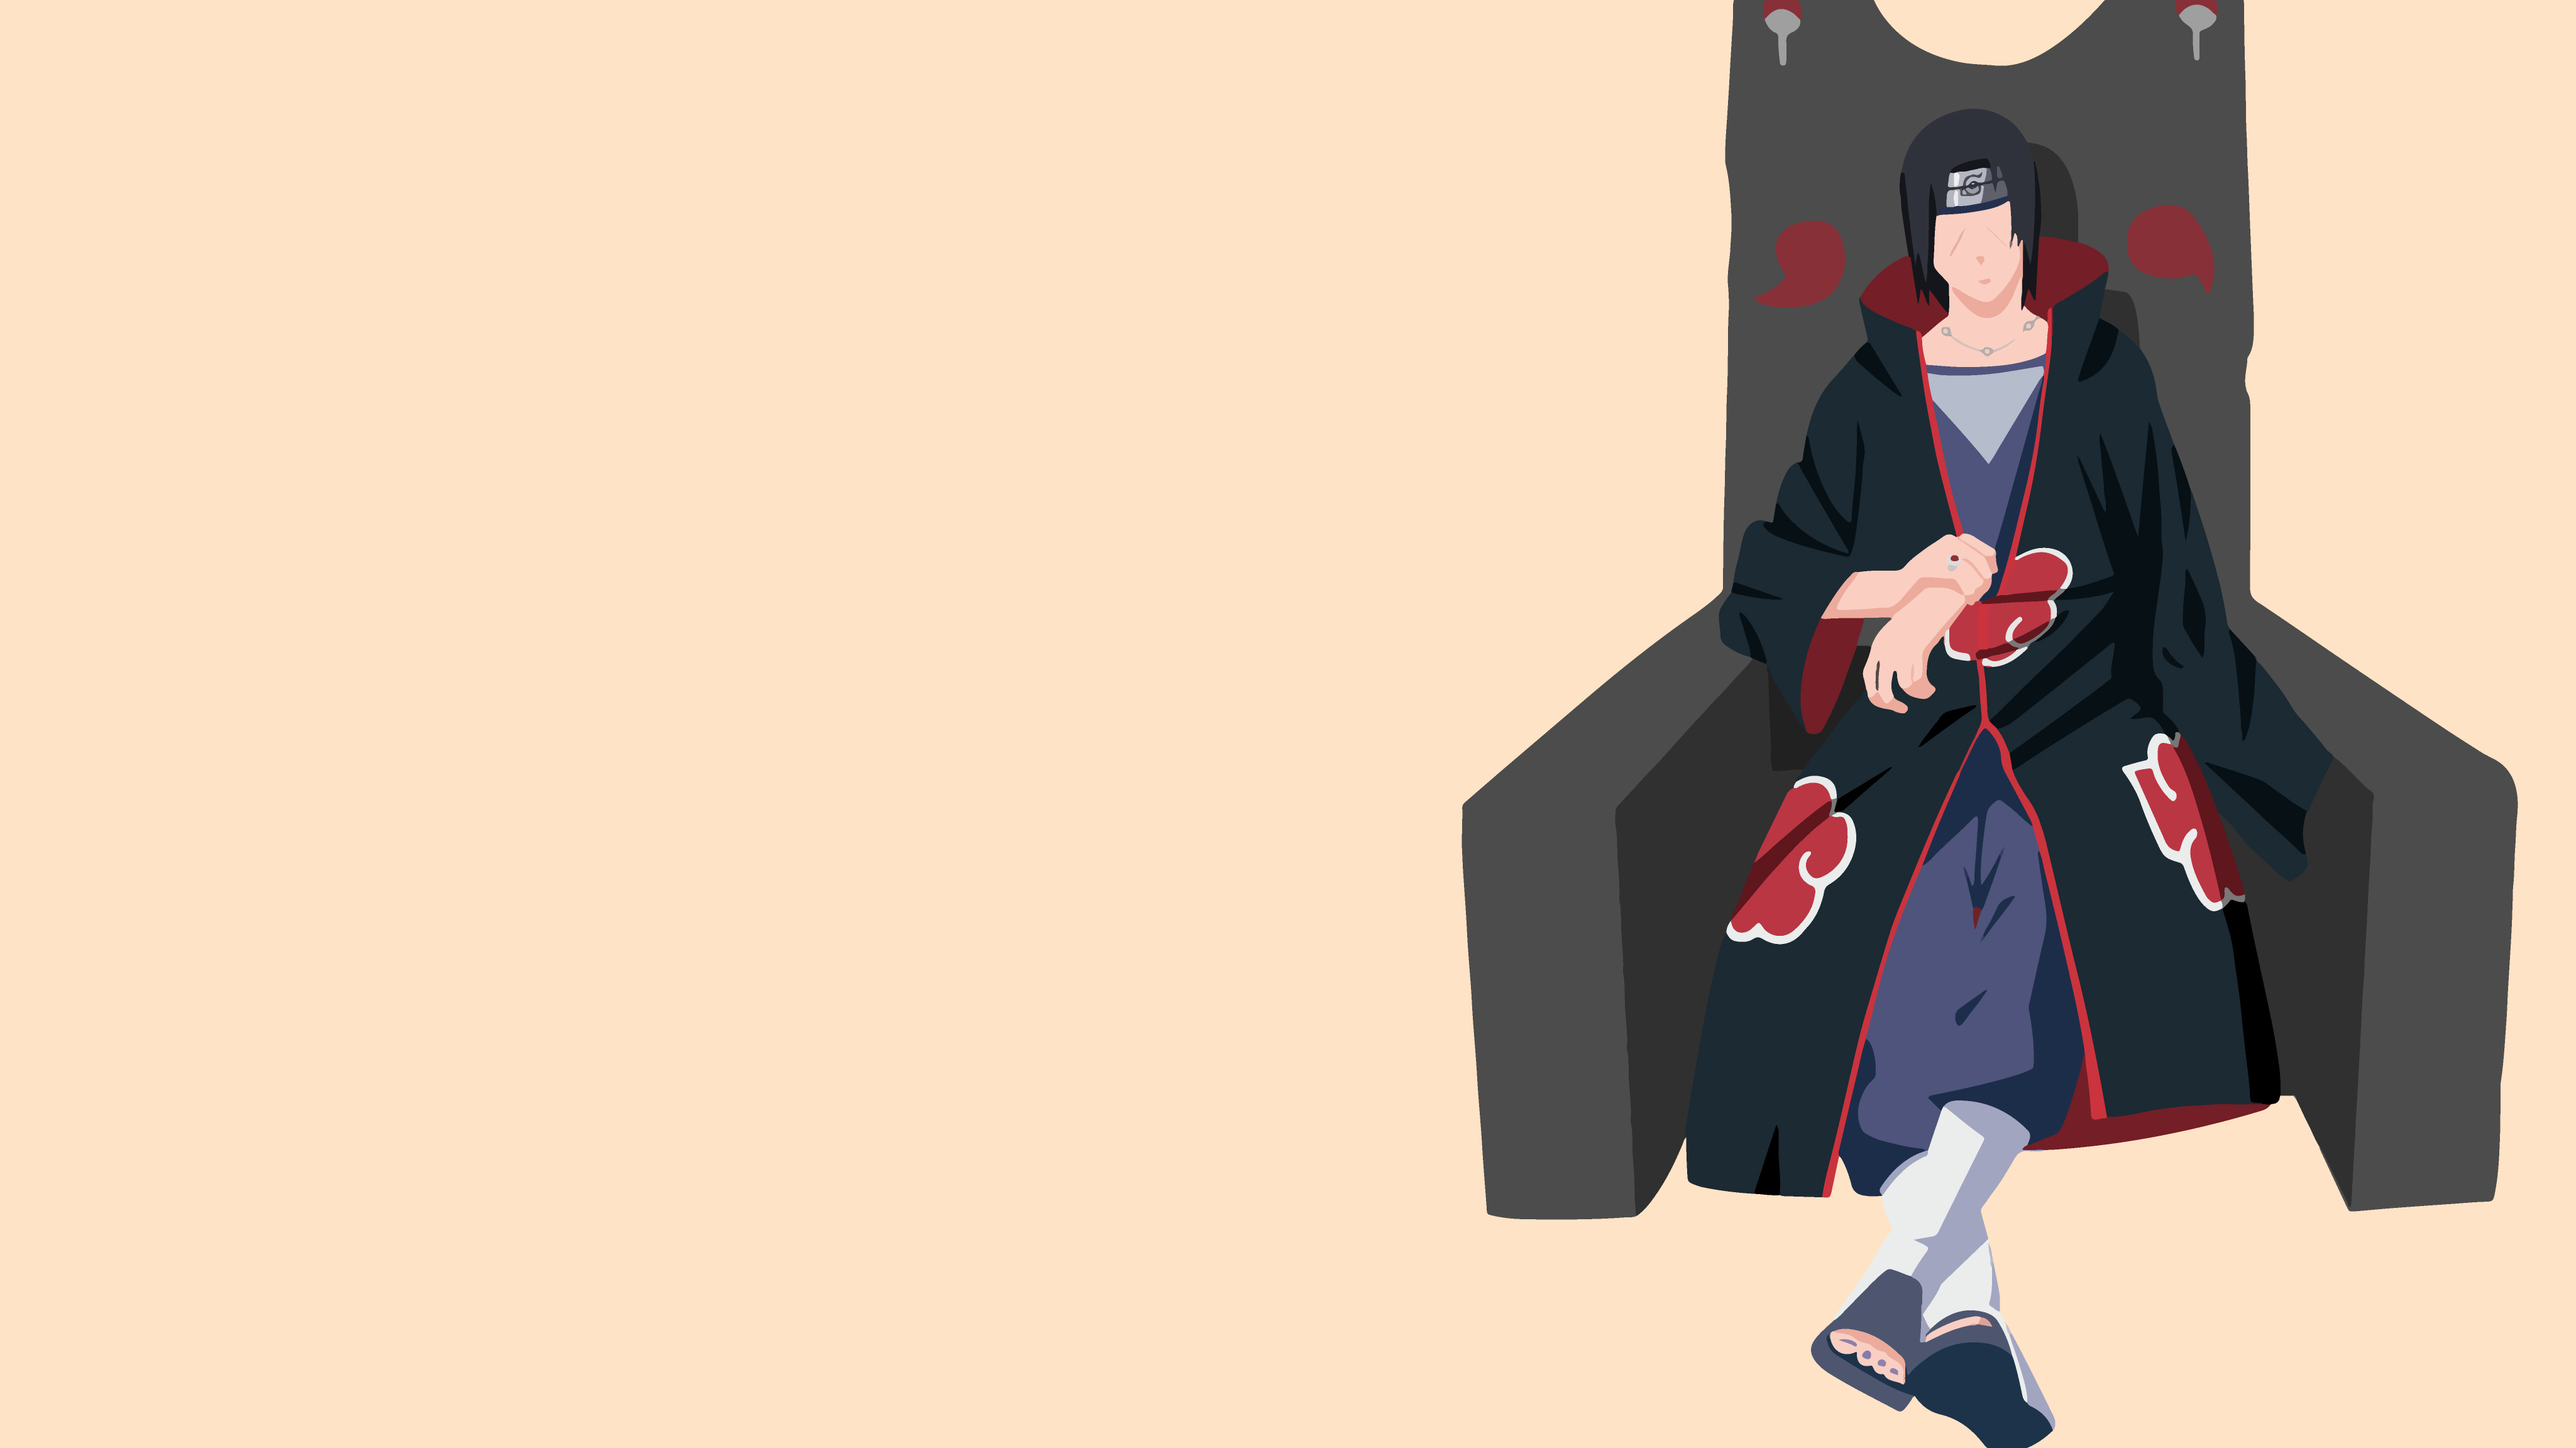 Itachi Sitting On The Throne 4k Ultra Hd Wallpaper Background Image 4098x2304 Id 1098550 Wallpaper Abyss